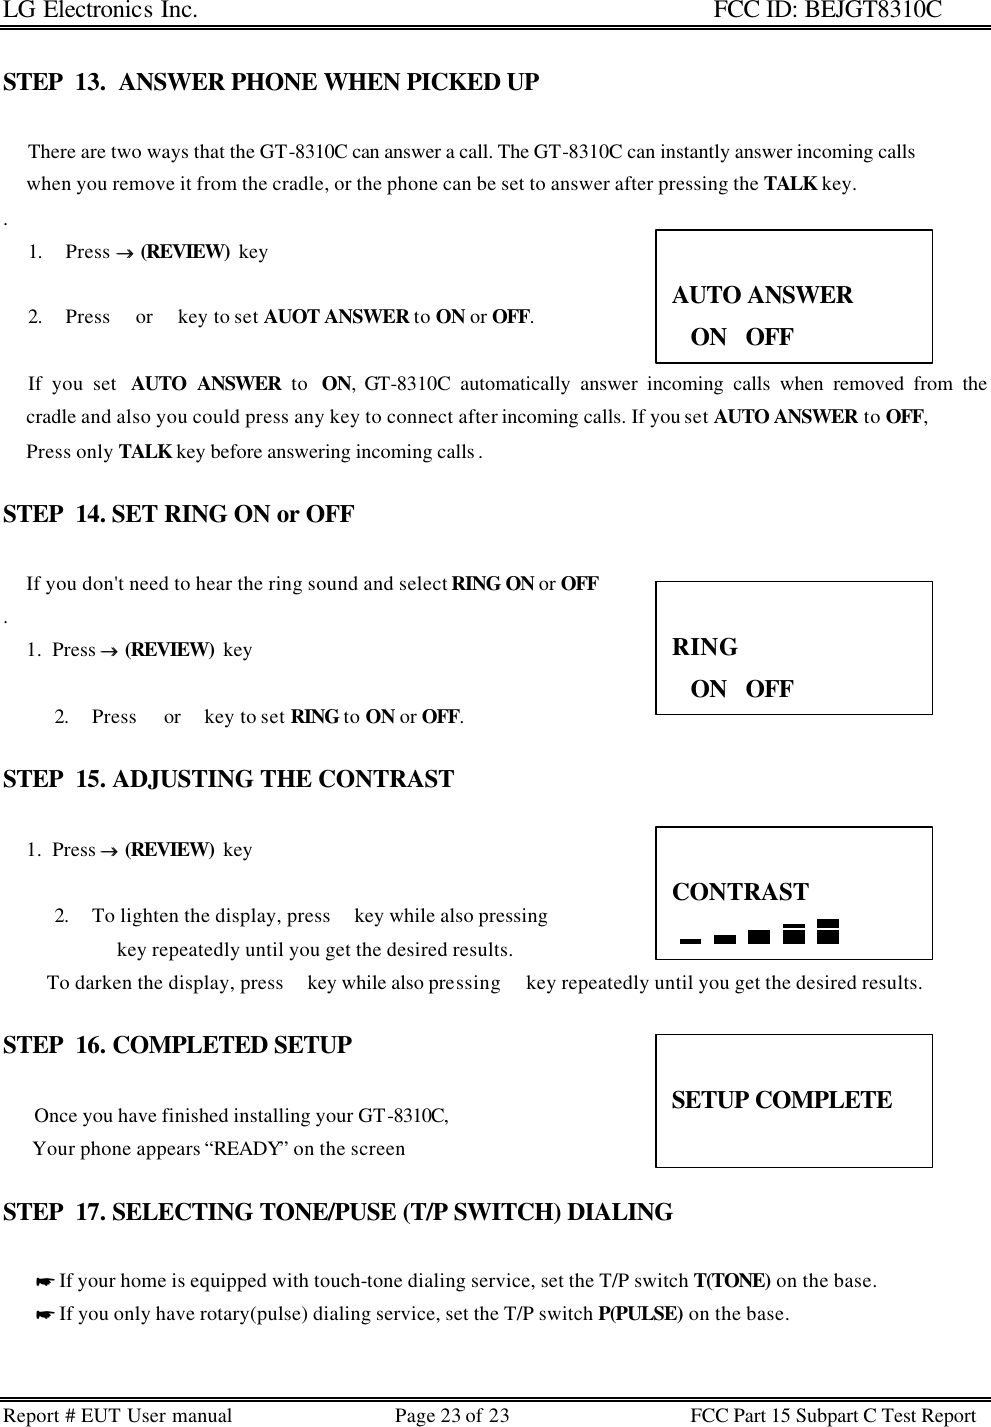 LG Electronics Inc.                                                                                                   FCC ID: BEJGT8310C Report # EUT User manual Page 23 of 23 FCC Part 15 Subpart C Test Report   STEP  13.  ANSWER PHONE WHEN PICKED UP            There are two ways that the GT-8310C can answer a call. The GT-8310C can instantly answer incoming calls       when you remove it from the cradle, or the phone can be set to answer after pressing the TALK key.        .  1. Press →→  (REVIEW)  key   2. Press  or  key to set AUOT ANSWER to ON or OFF.             If you set  AUTO ANSWER to  ON, GT-8310C automatically answer incoming calls when removed from the      cradle and also you could press any key to connect after incoming calls. If you set AUTO ANSWER to OFF,       Press only TALK key before answering incoming calls .   STEP  14. SET RING ON or OFF               If you don&apos;t need to hear the ring sound and select RING ON or OFF .       1.  Press →→  (REVIEW)  key   2. Press  or  key to set RING to ON or OFF.  STEP  15. ADJUSTING THE CONTRAST          1.  Press →→  (REVIEW)  key   2. To lighten the display, press  key while also pressing   key repeatedly until you get the desired results.          To darken the display, press  key while also pressing  key repeatedly until you get the desired results.  STEP  16. COMPLETED SETUP       Once you have finished installing your GT-8310C,        Your phone appears “READY” on the screen  STEP  17. SELECTING TONE/PUSE (T/P SWITCH) DIALING         * If your home is equipped with touch-tone dialing service, set the T/P switch T(TONE) on the base.        * If you only have rotary(pulse) dialing service, set the T/P switch P(PULSE) on the base.    AUTO ANSWER ON   OFF  RING ON   OFF  CONTRAST   SETUP COMPLETE  